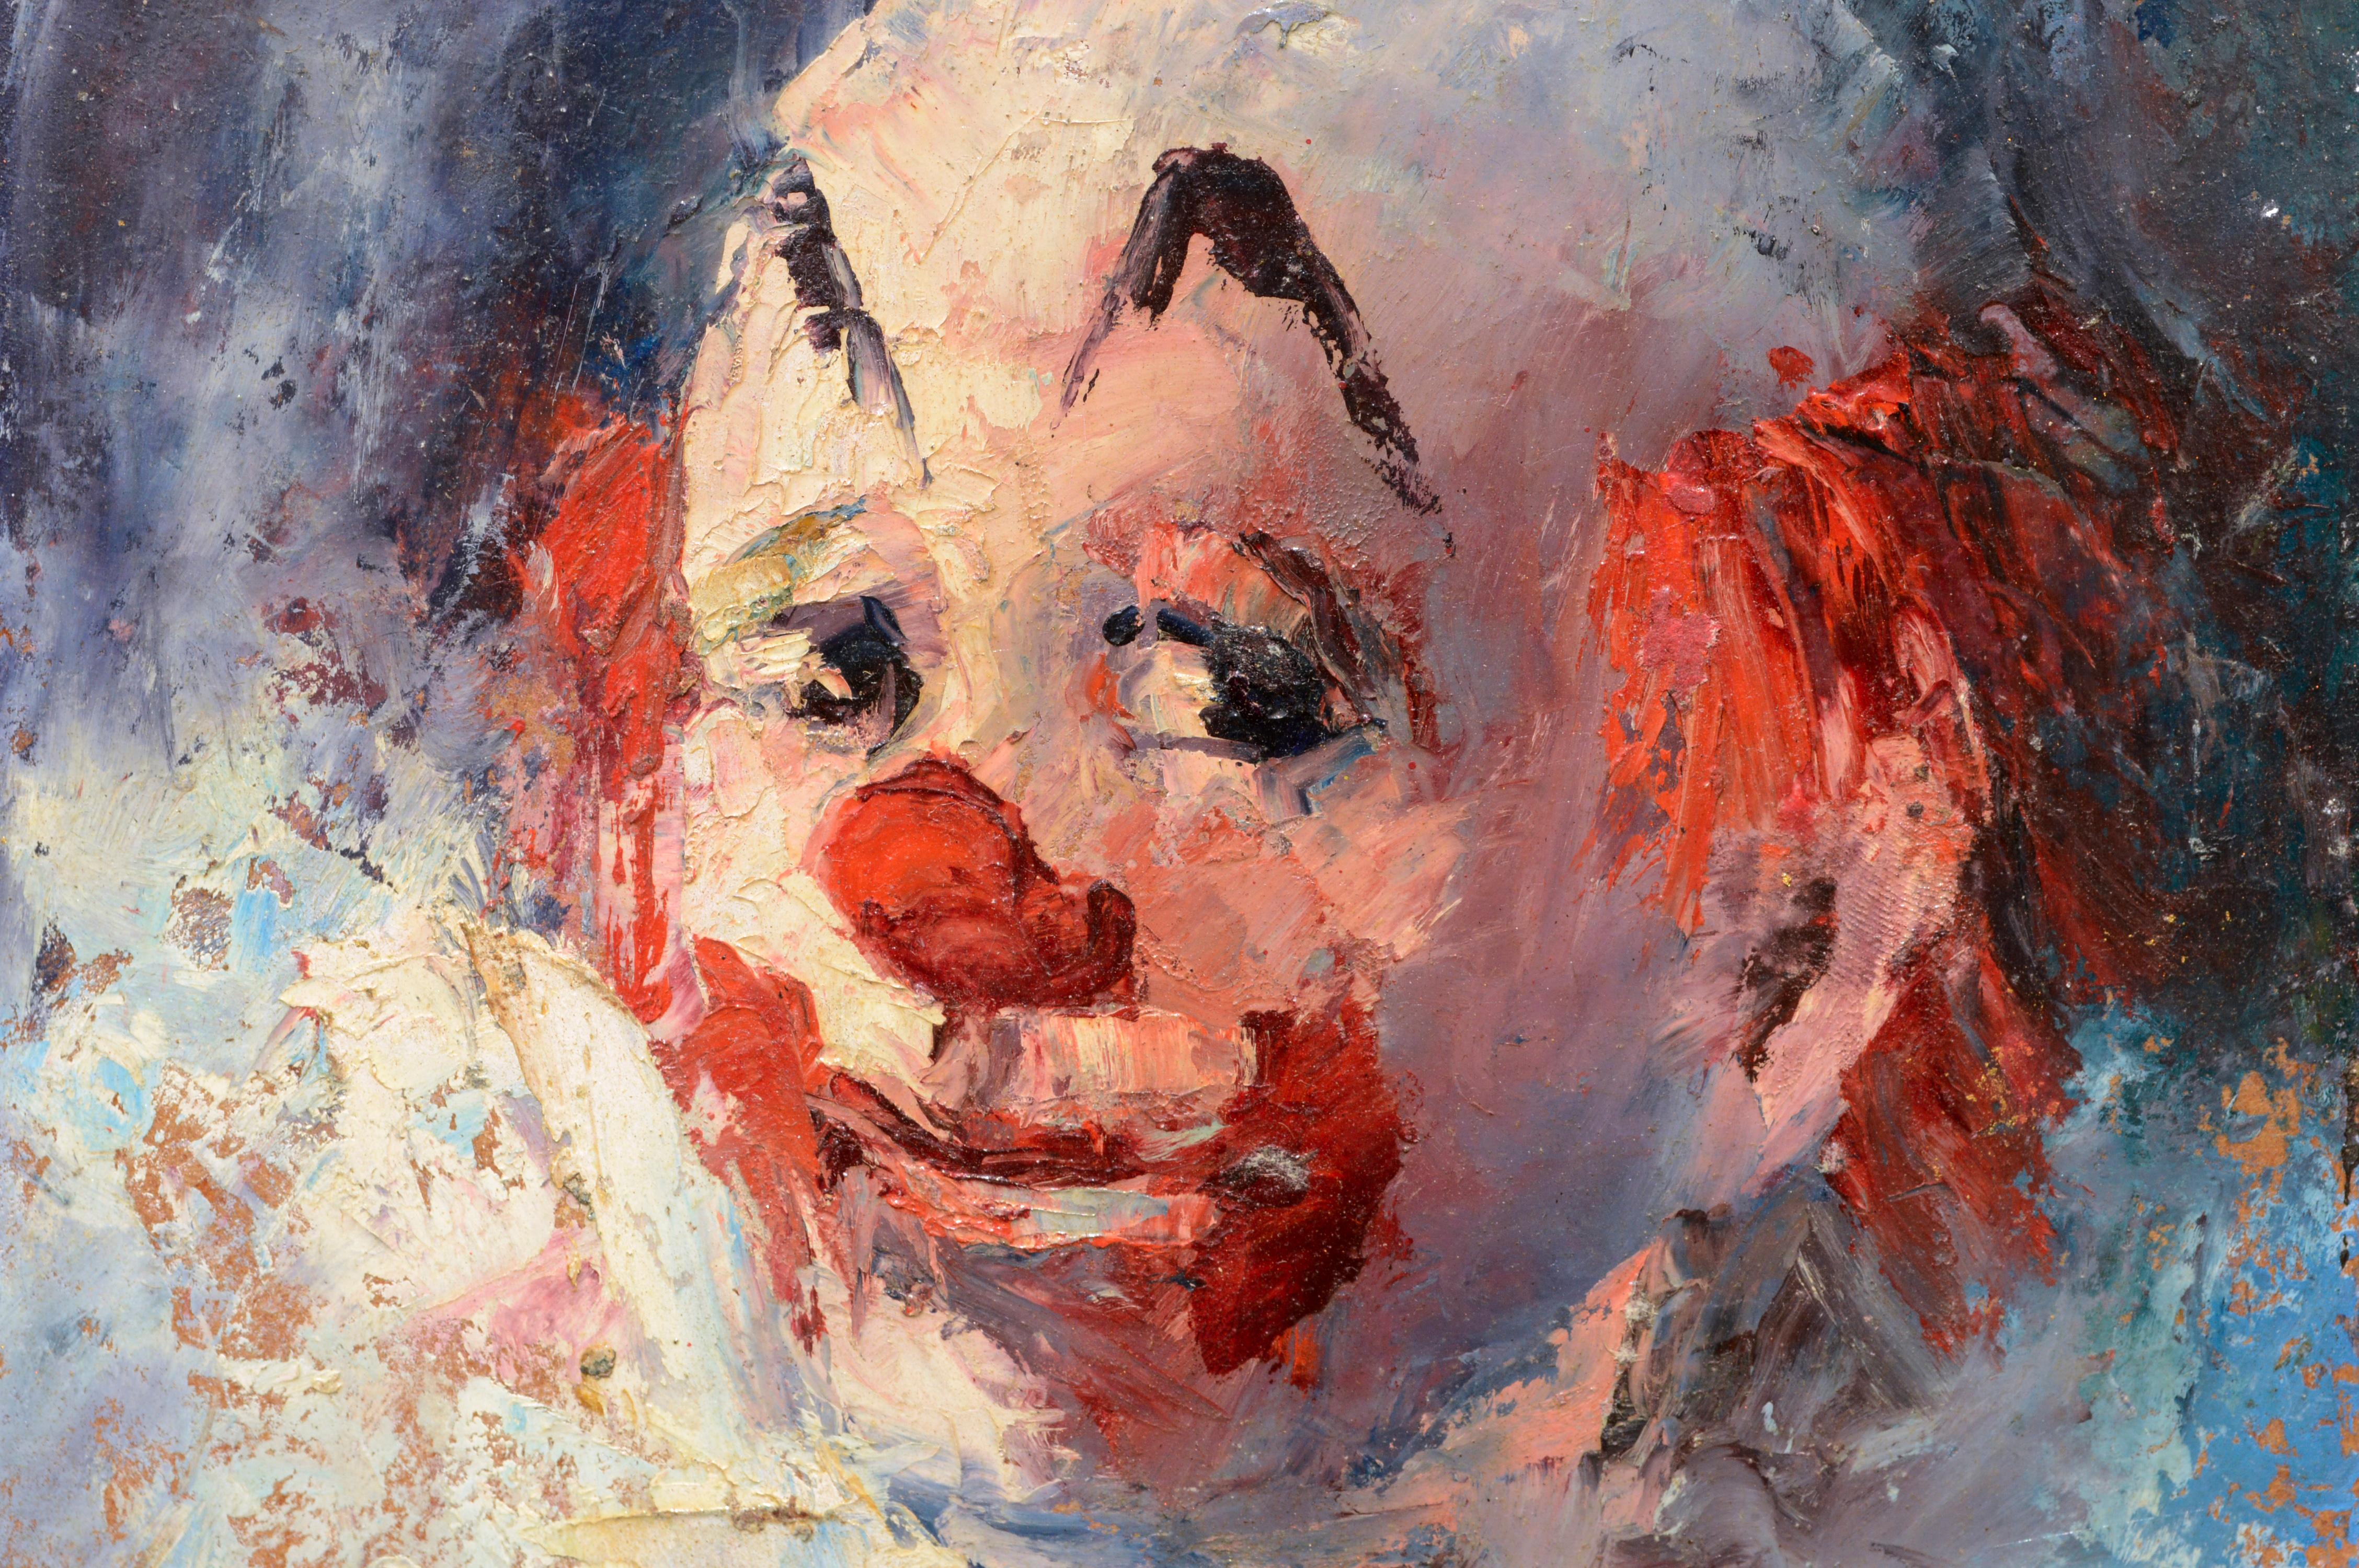 1960s Clown Portrait #4 - Painting by Marjorie May Blake